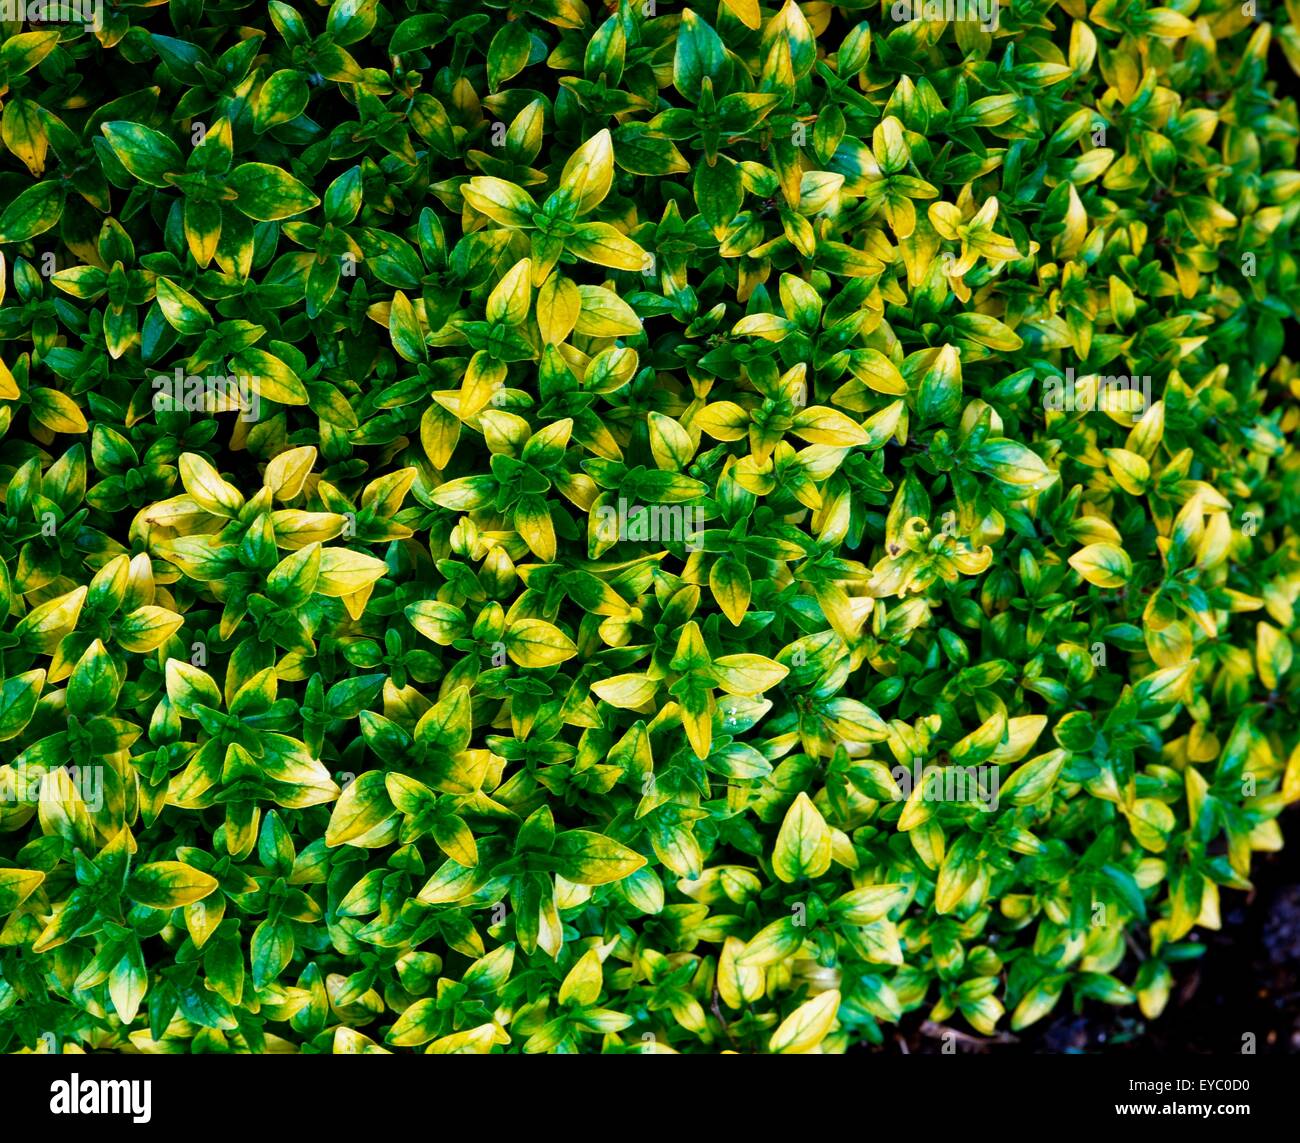 Gold Tipped Marjoram Stock Photo